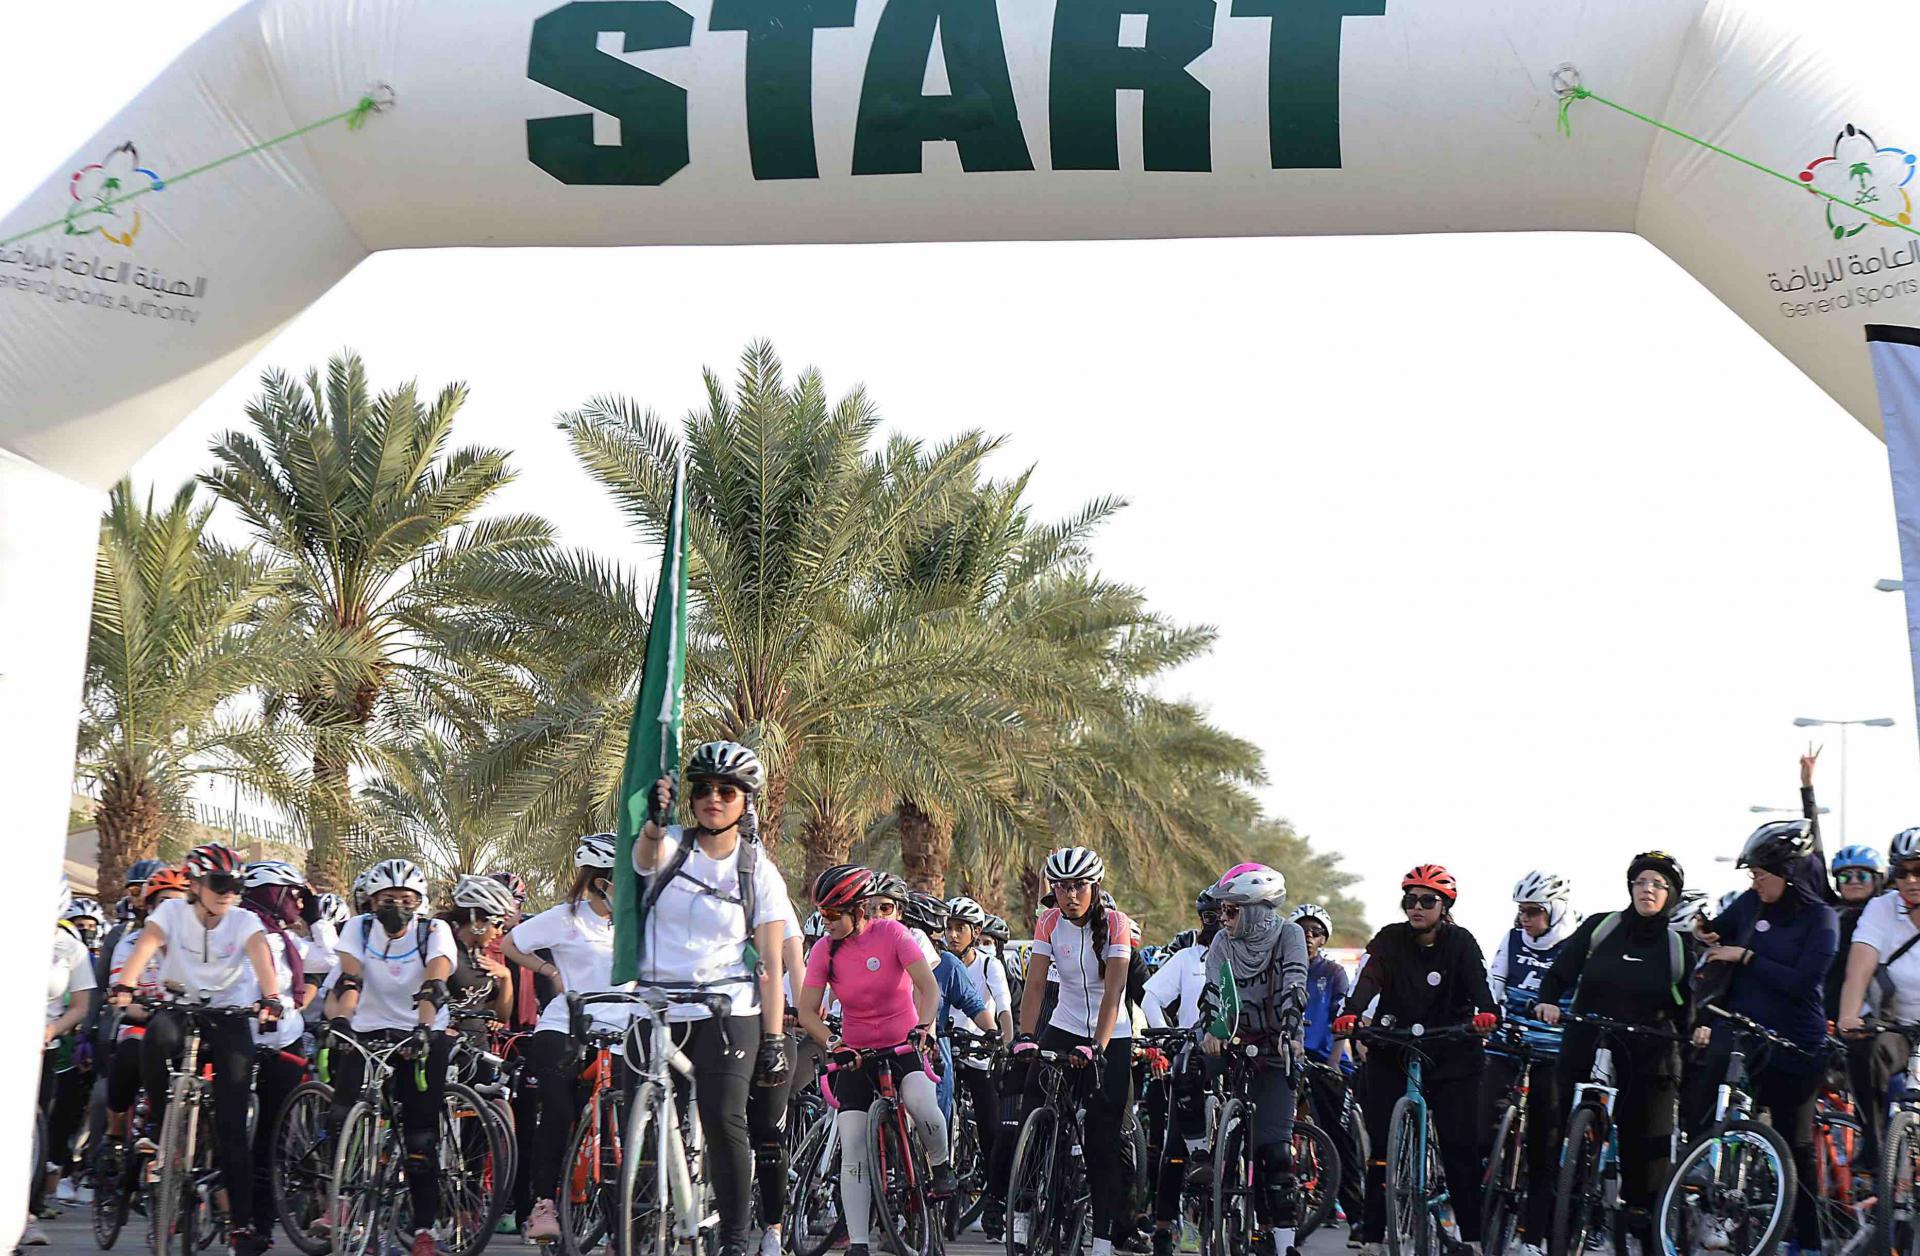 The Saudi Tour will run from February 4 to 8 on a star-shaped course around the capital Riyadh